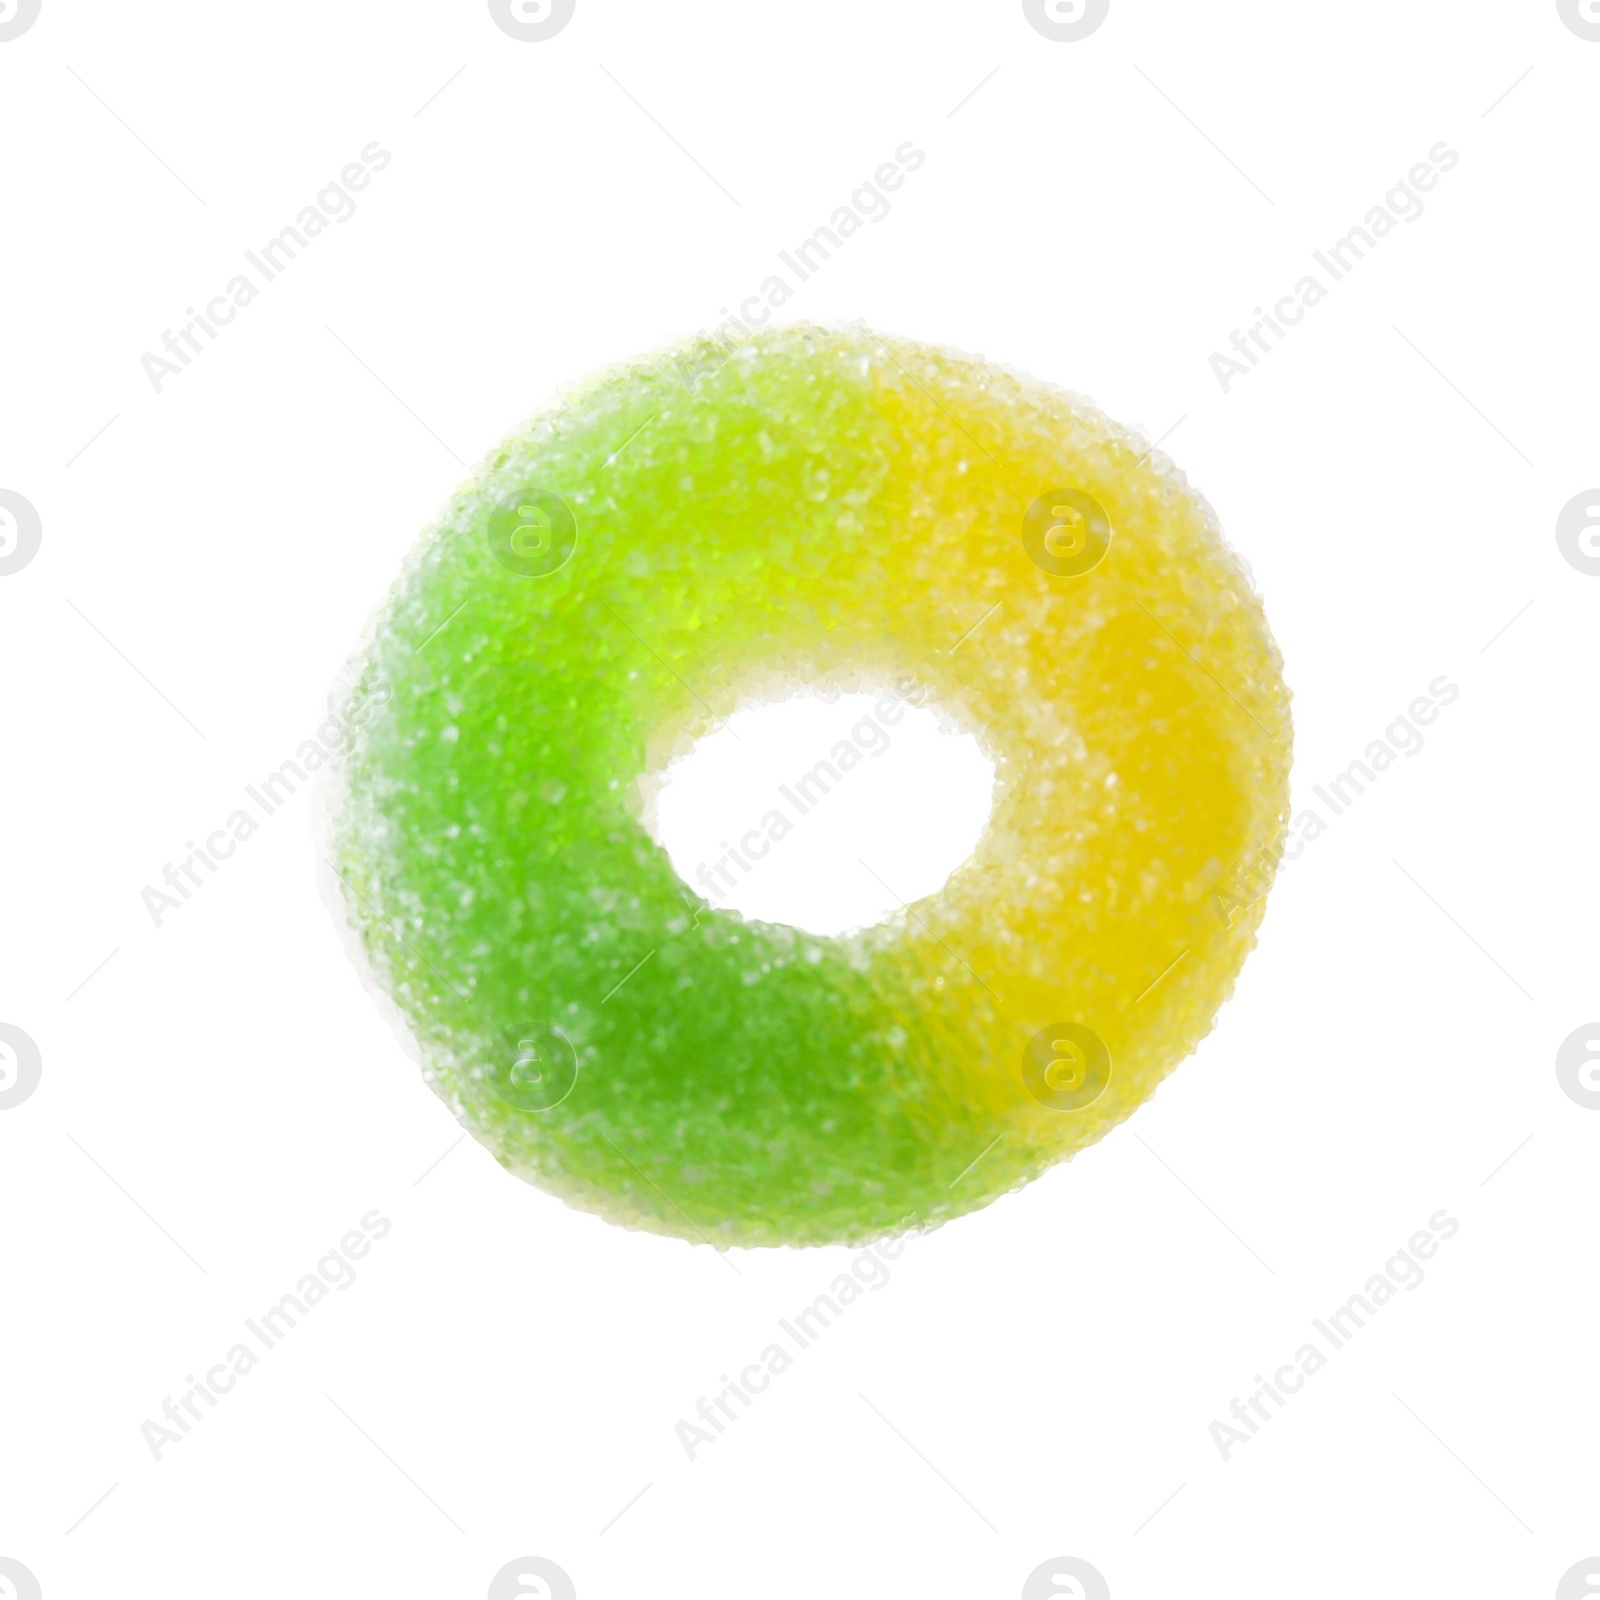 Photo of Sweet colorful jelly candy on white background